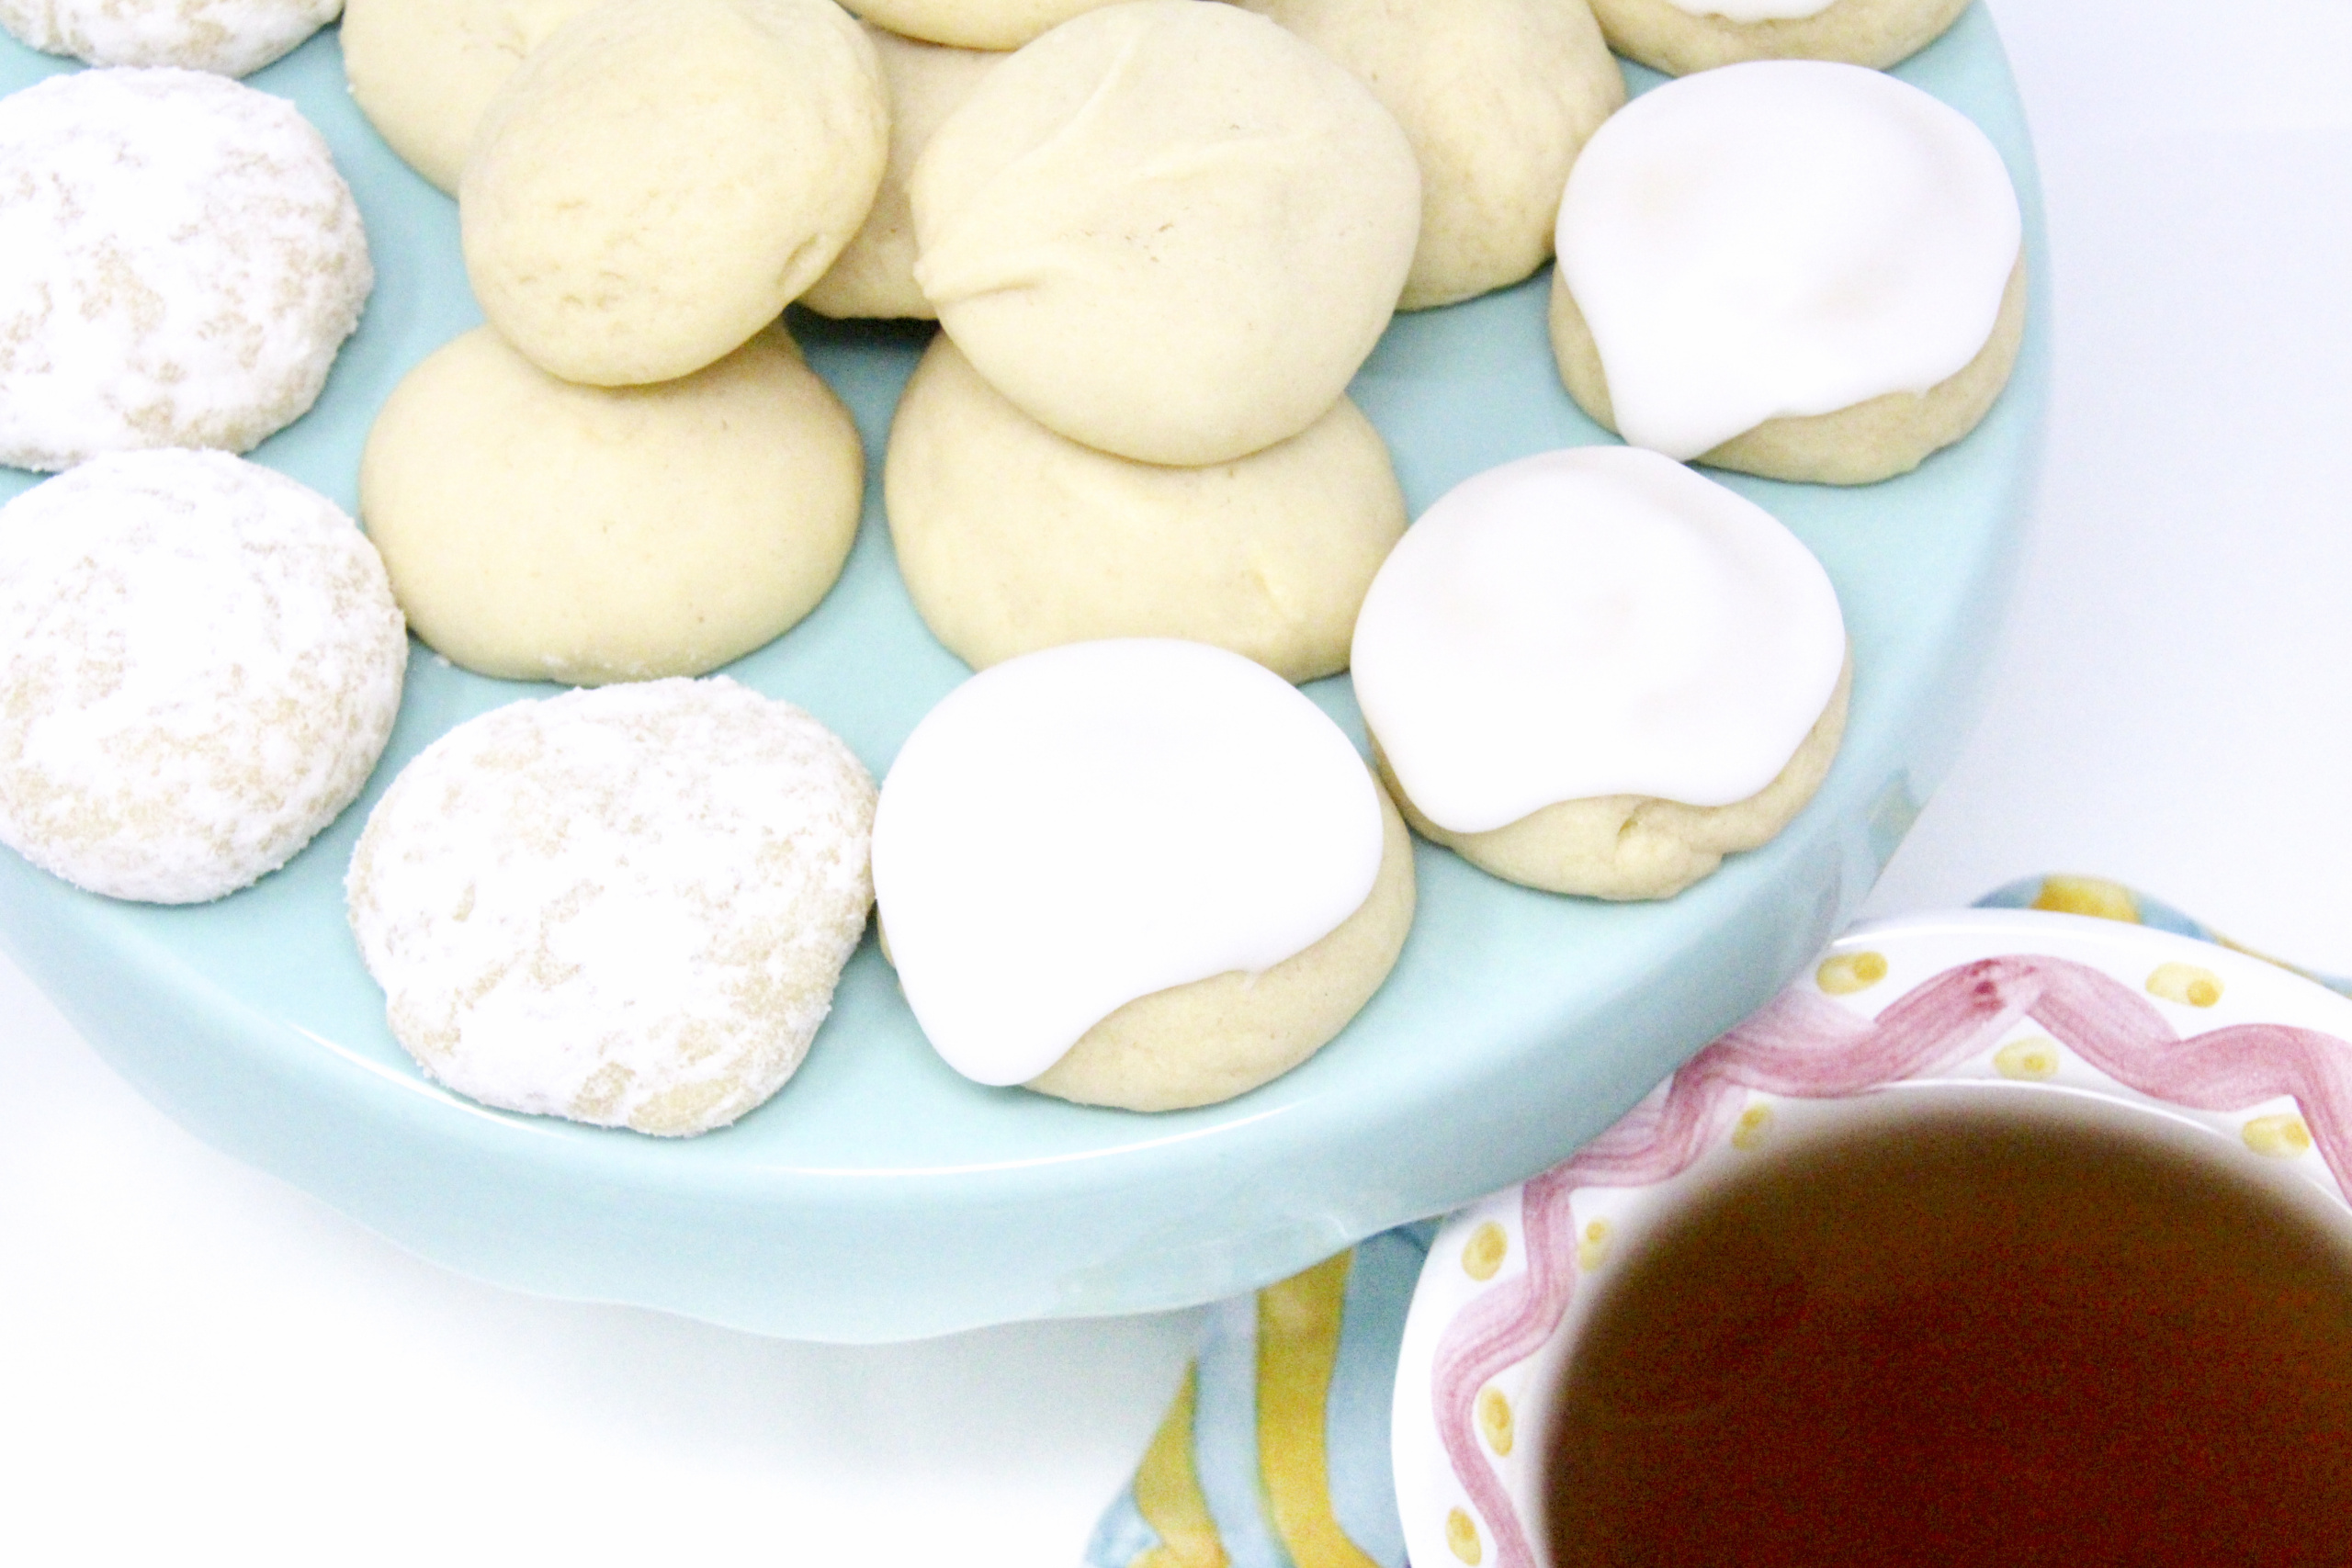 Swan’s Southern Tea Cakes, are delightful traditional cookies served with tea. With only six pantry and refrigerated staples, these mix up quickly and make a large enough batch to share with family and friends. Recipe shared with permission granted by Bree Baker and Poisoned Pen Press, publisher of PARTNERS IN LIME